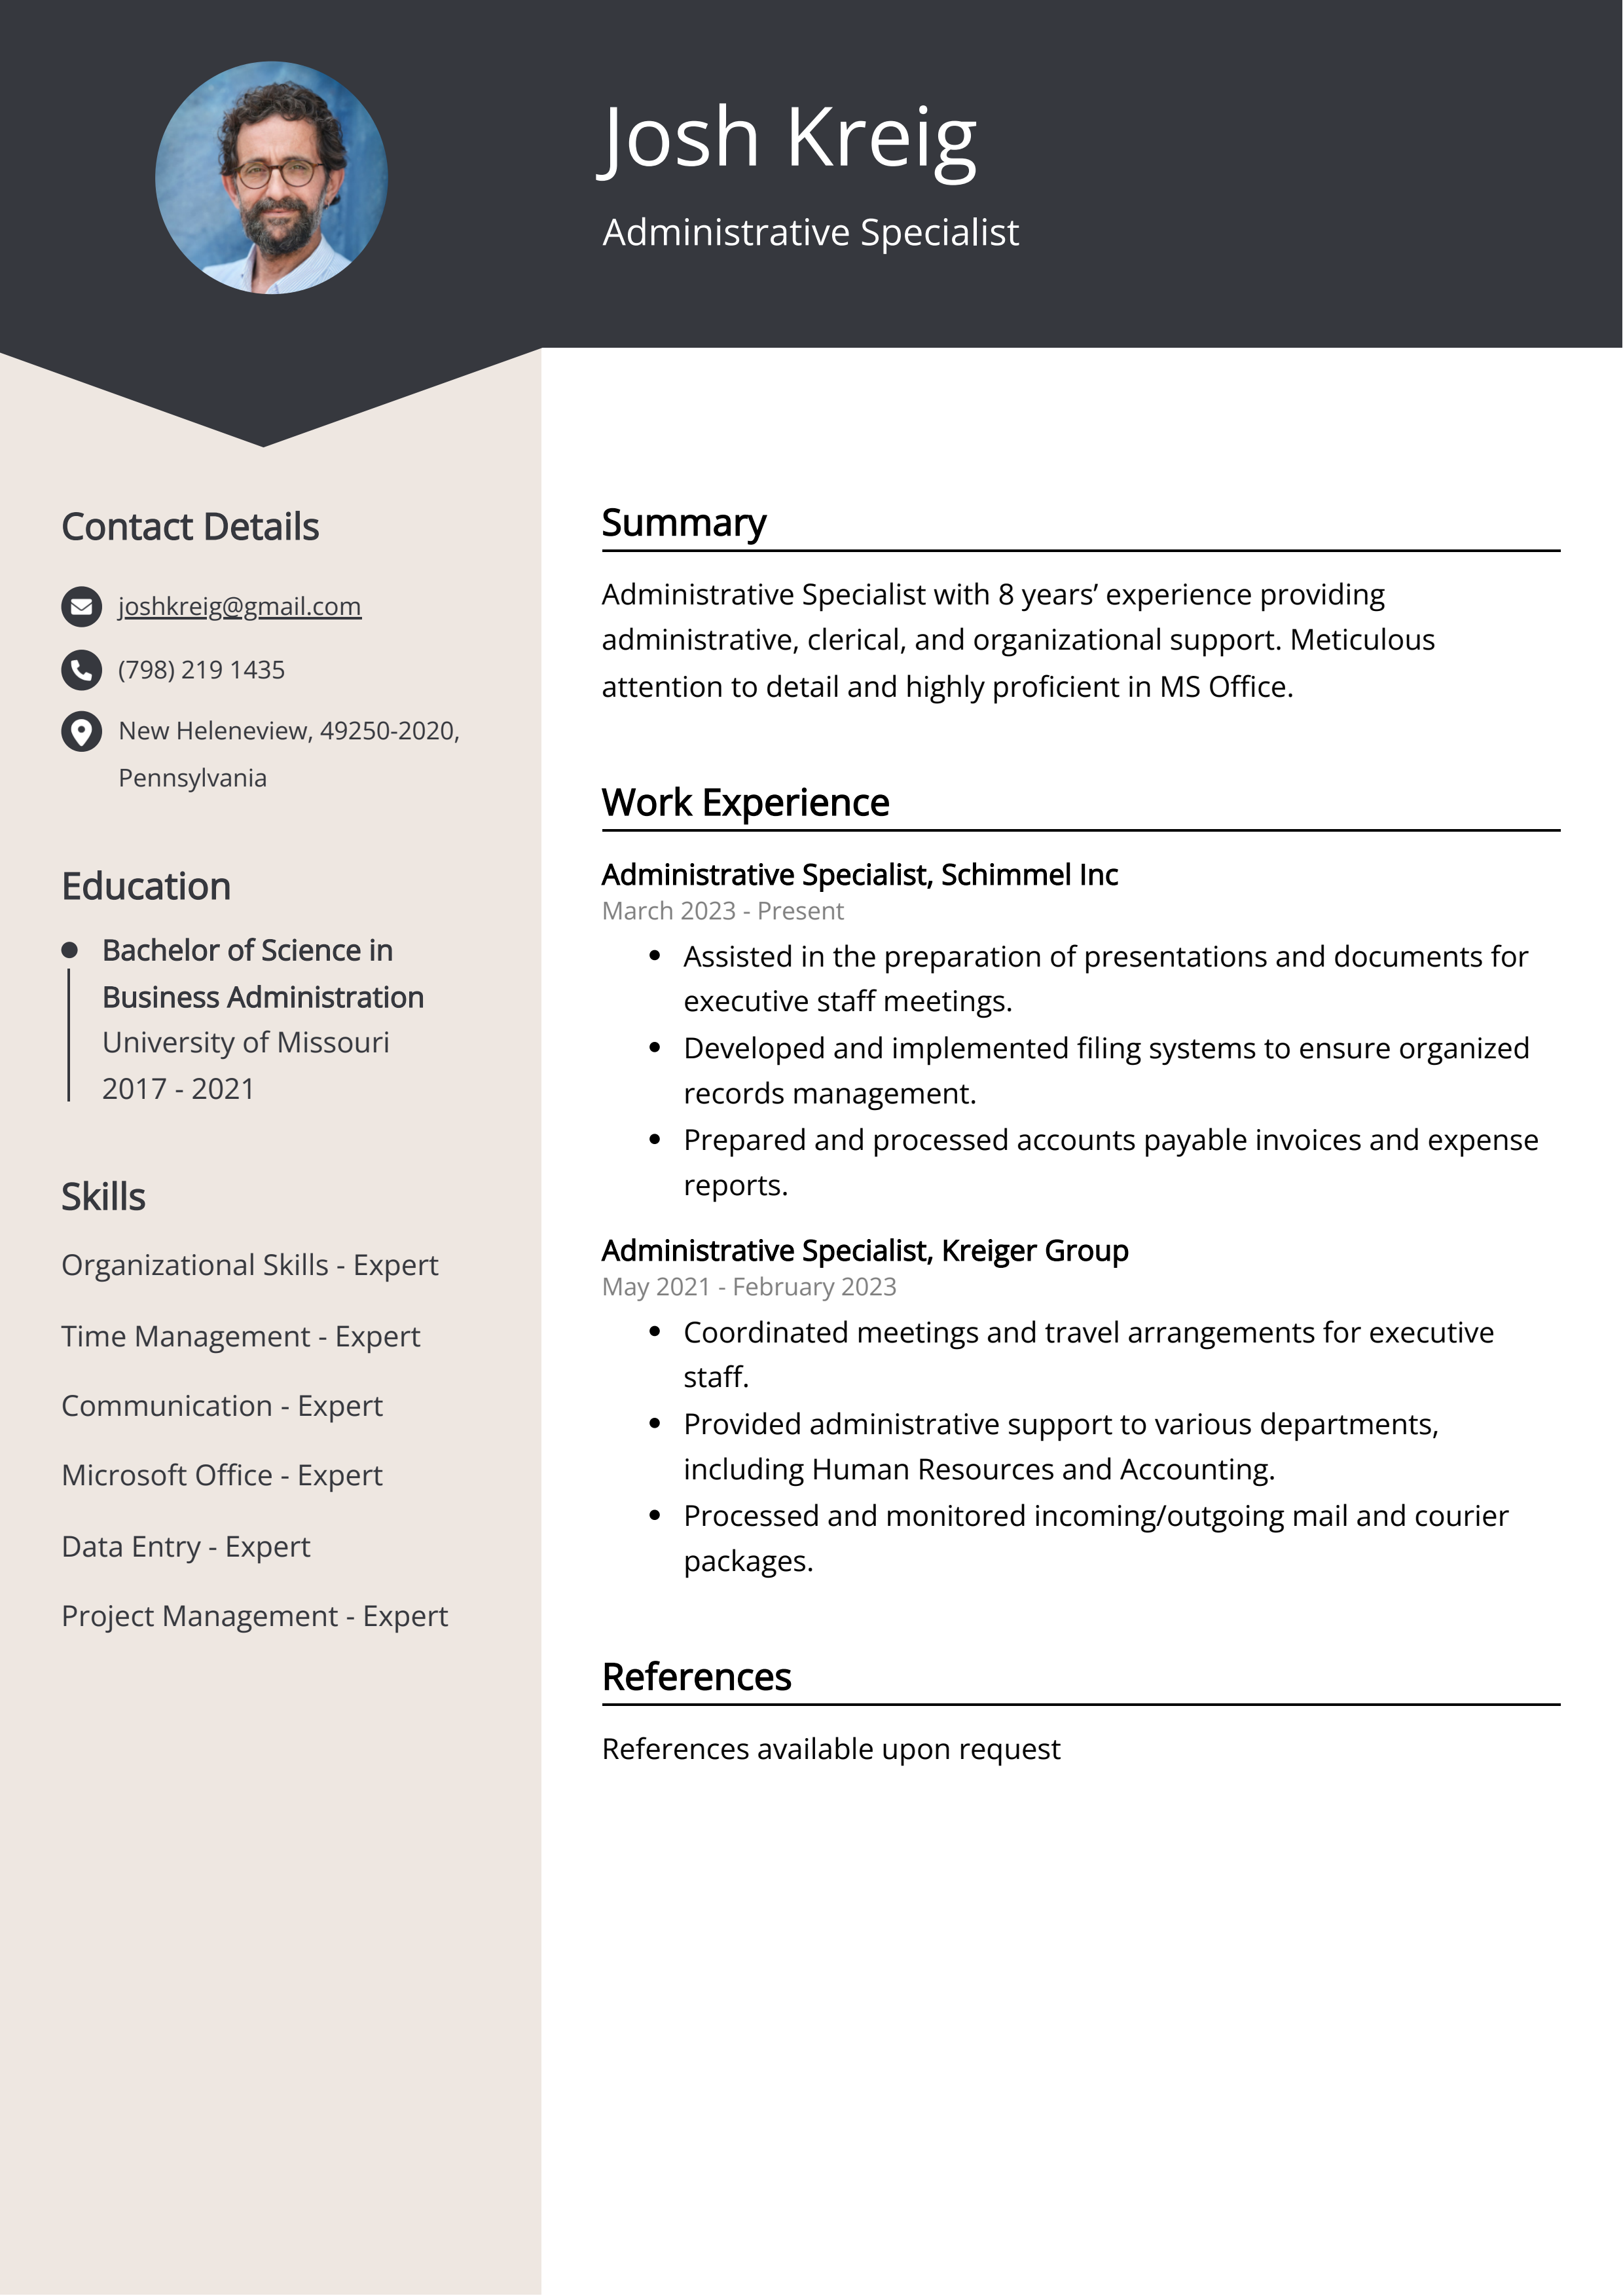 Administrative Specialist CV Example